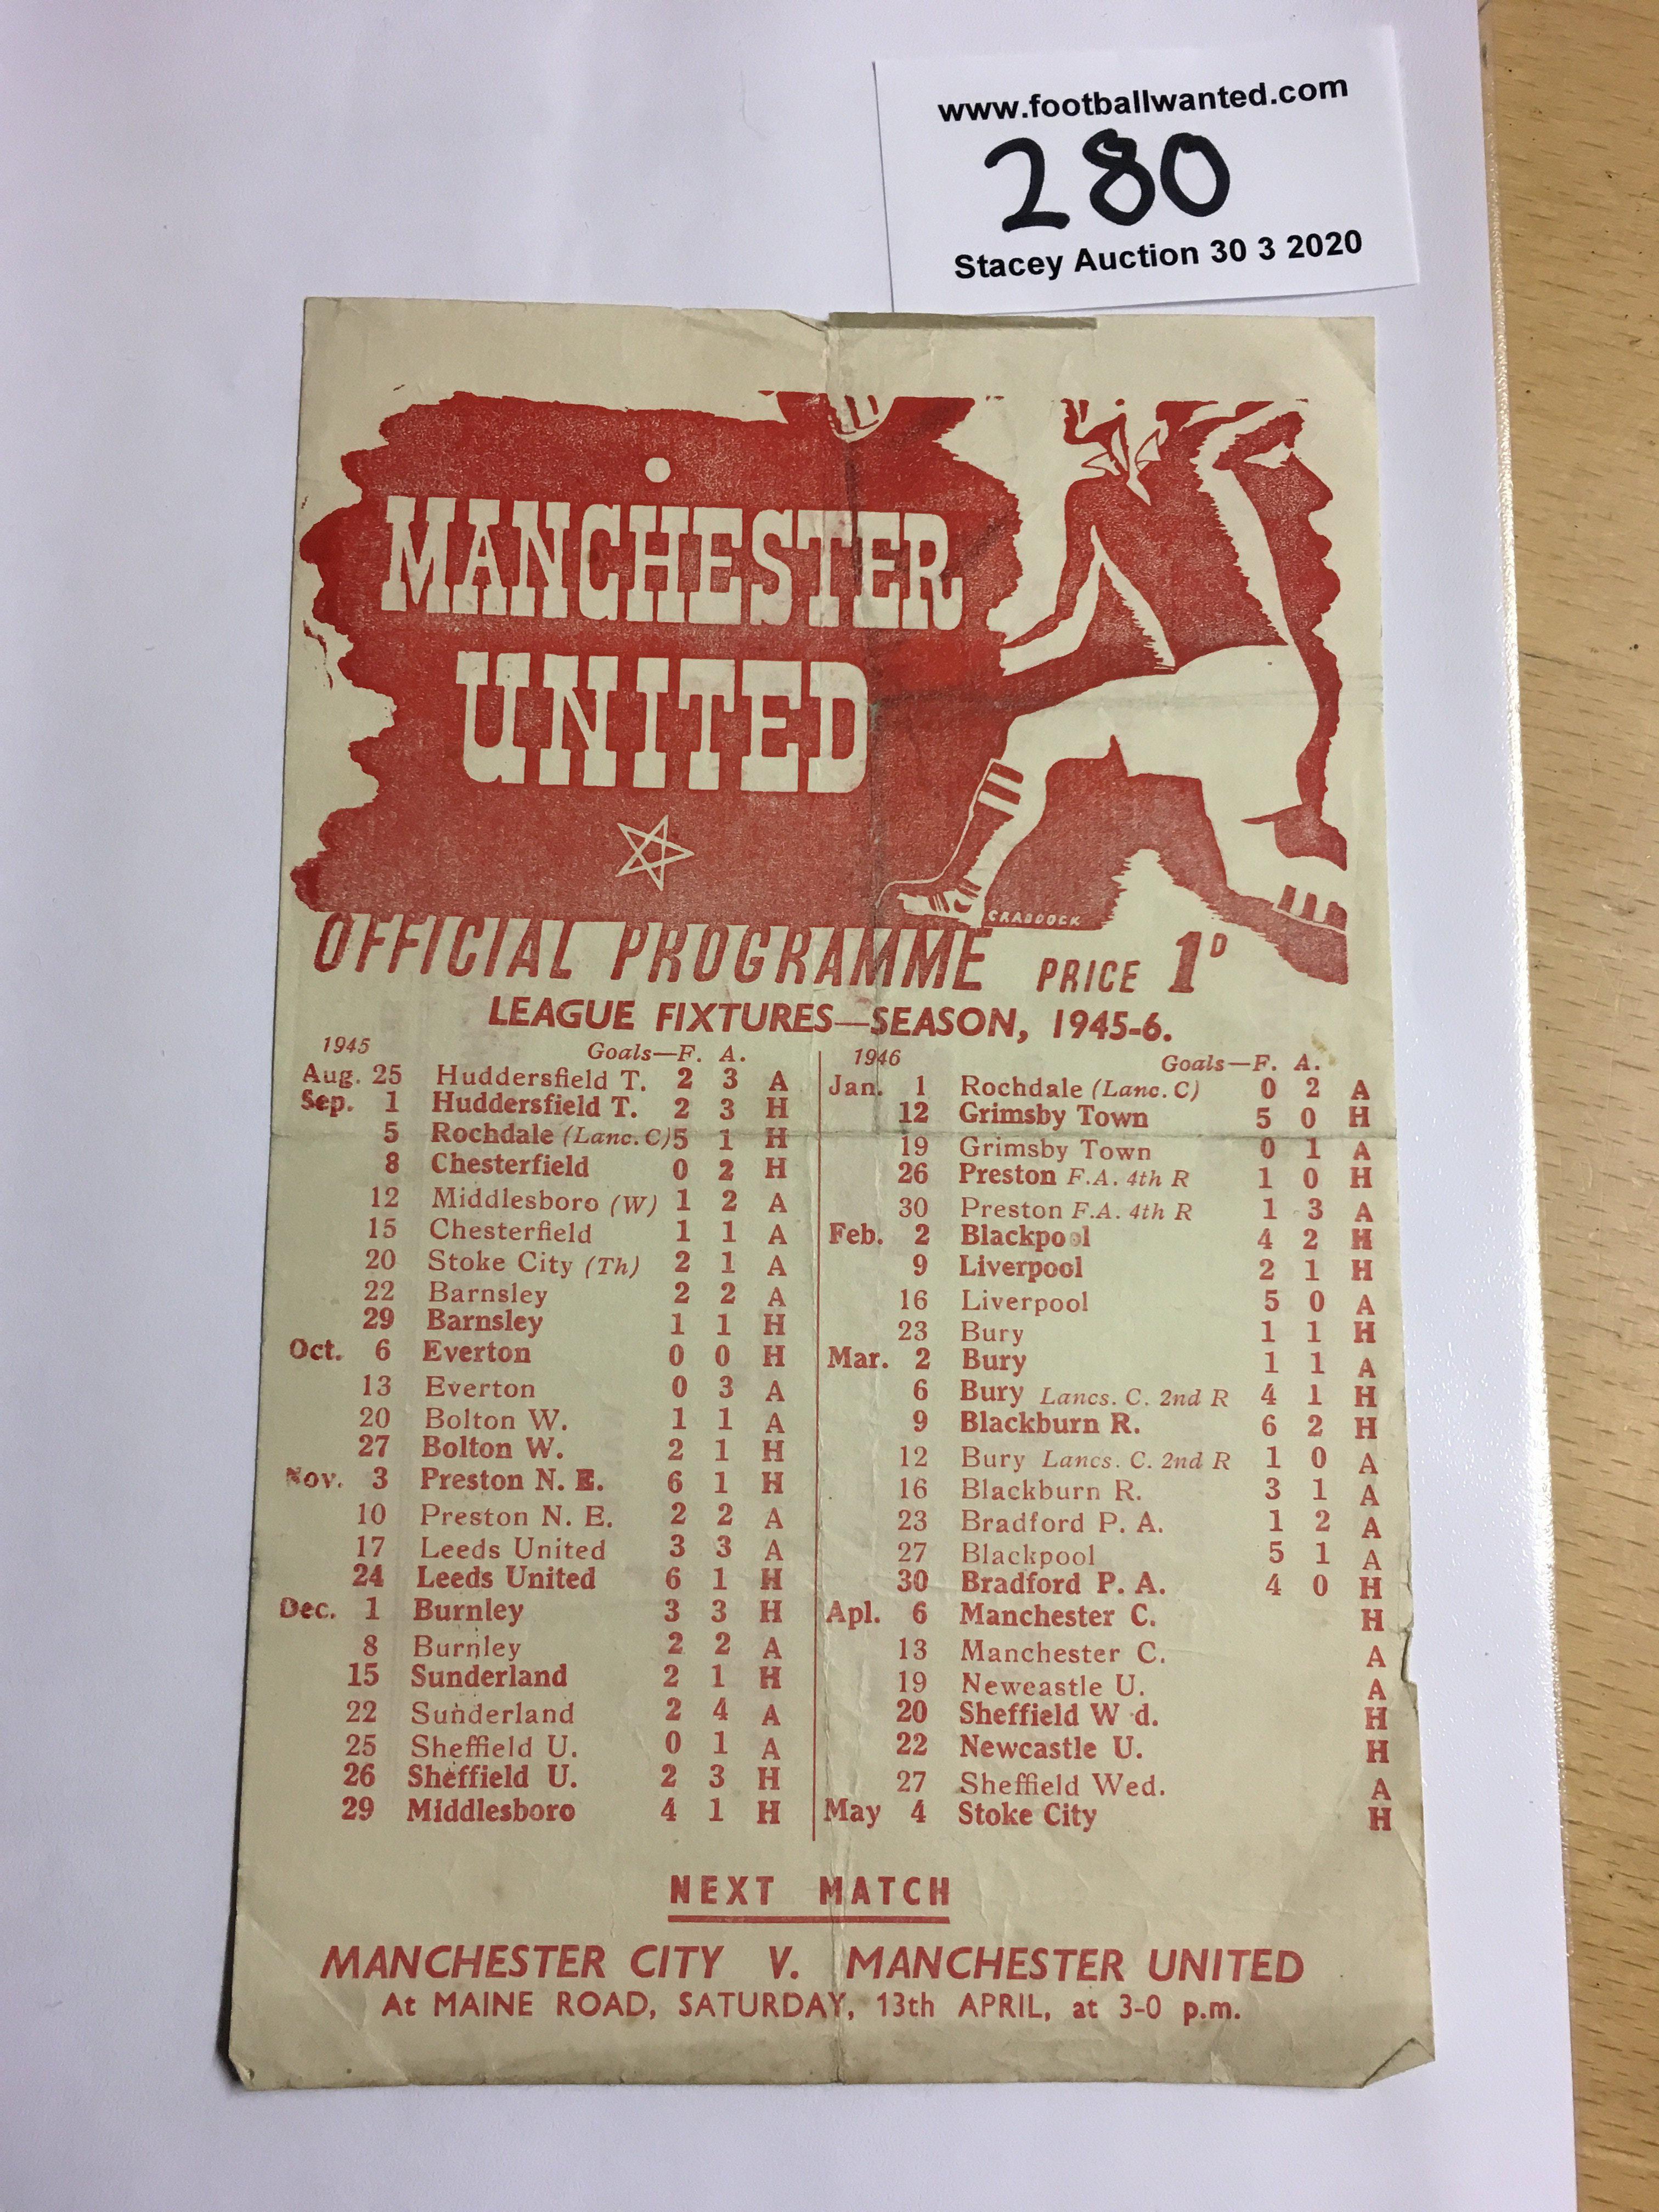 45/46 Manchester United v Manchester City Football Programme: Good condition League match with no